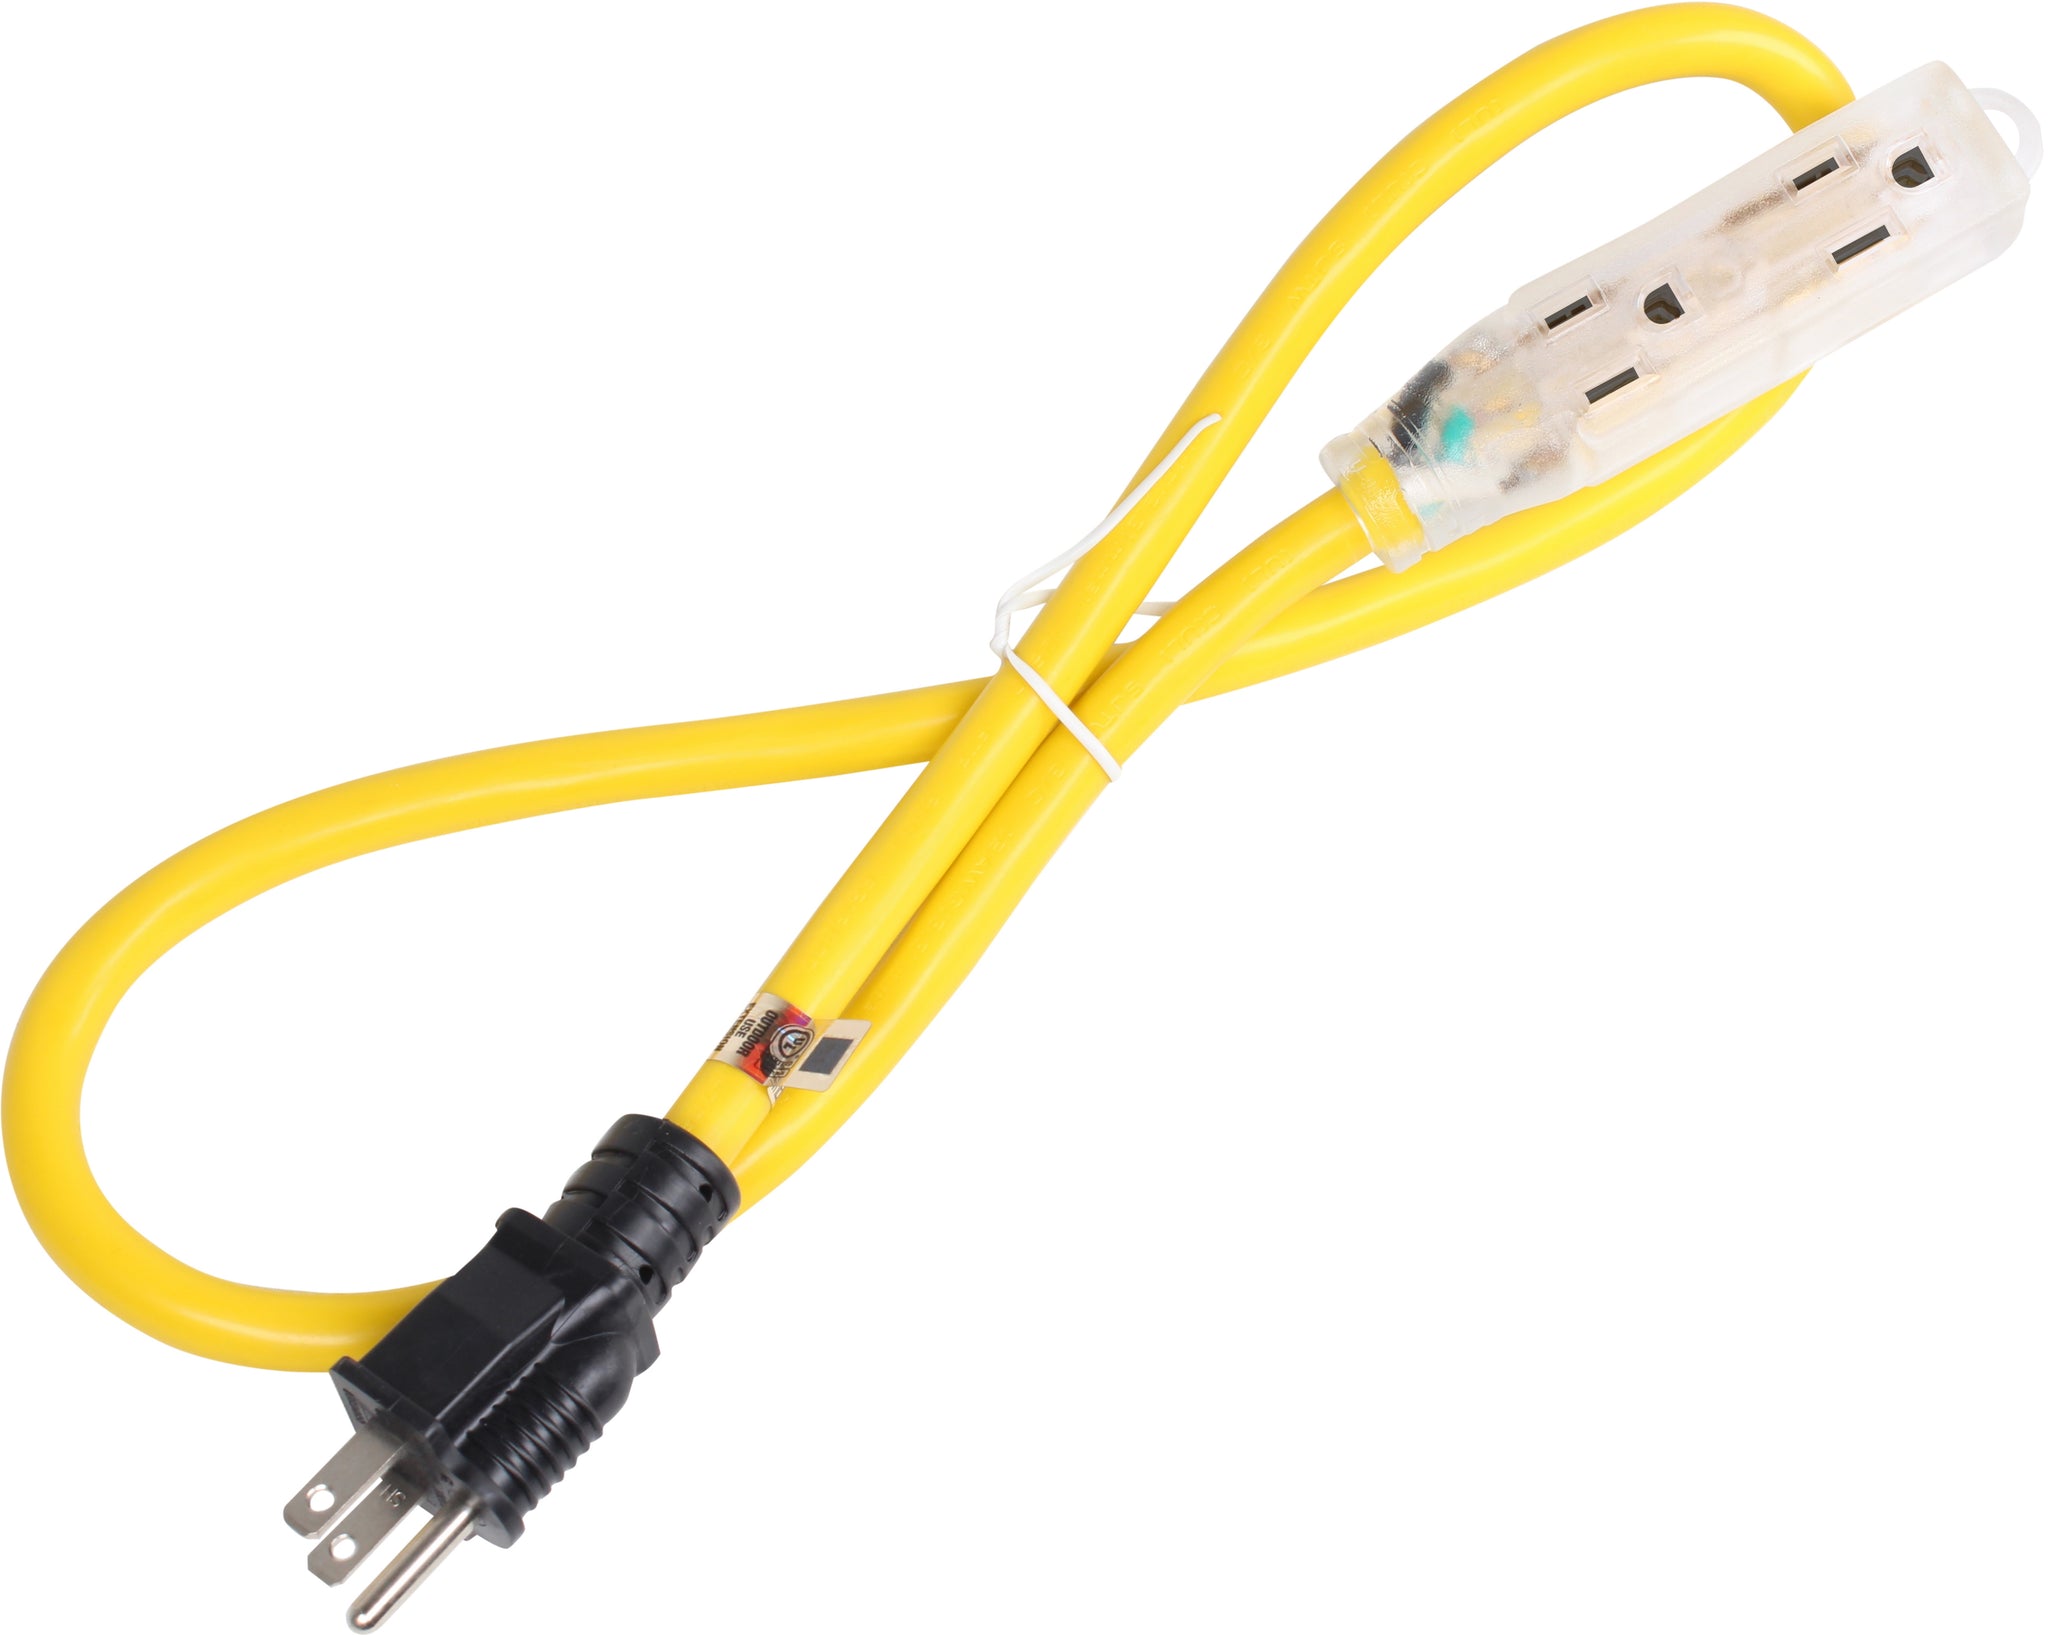 Lighted Outdoor Extension Cord - Heavy Duty Yellow Power Cable Splitter by Journeyman-pro 3-Prong NEMA 5-15P to Three Electrical Outlets (Inline